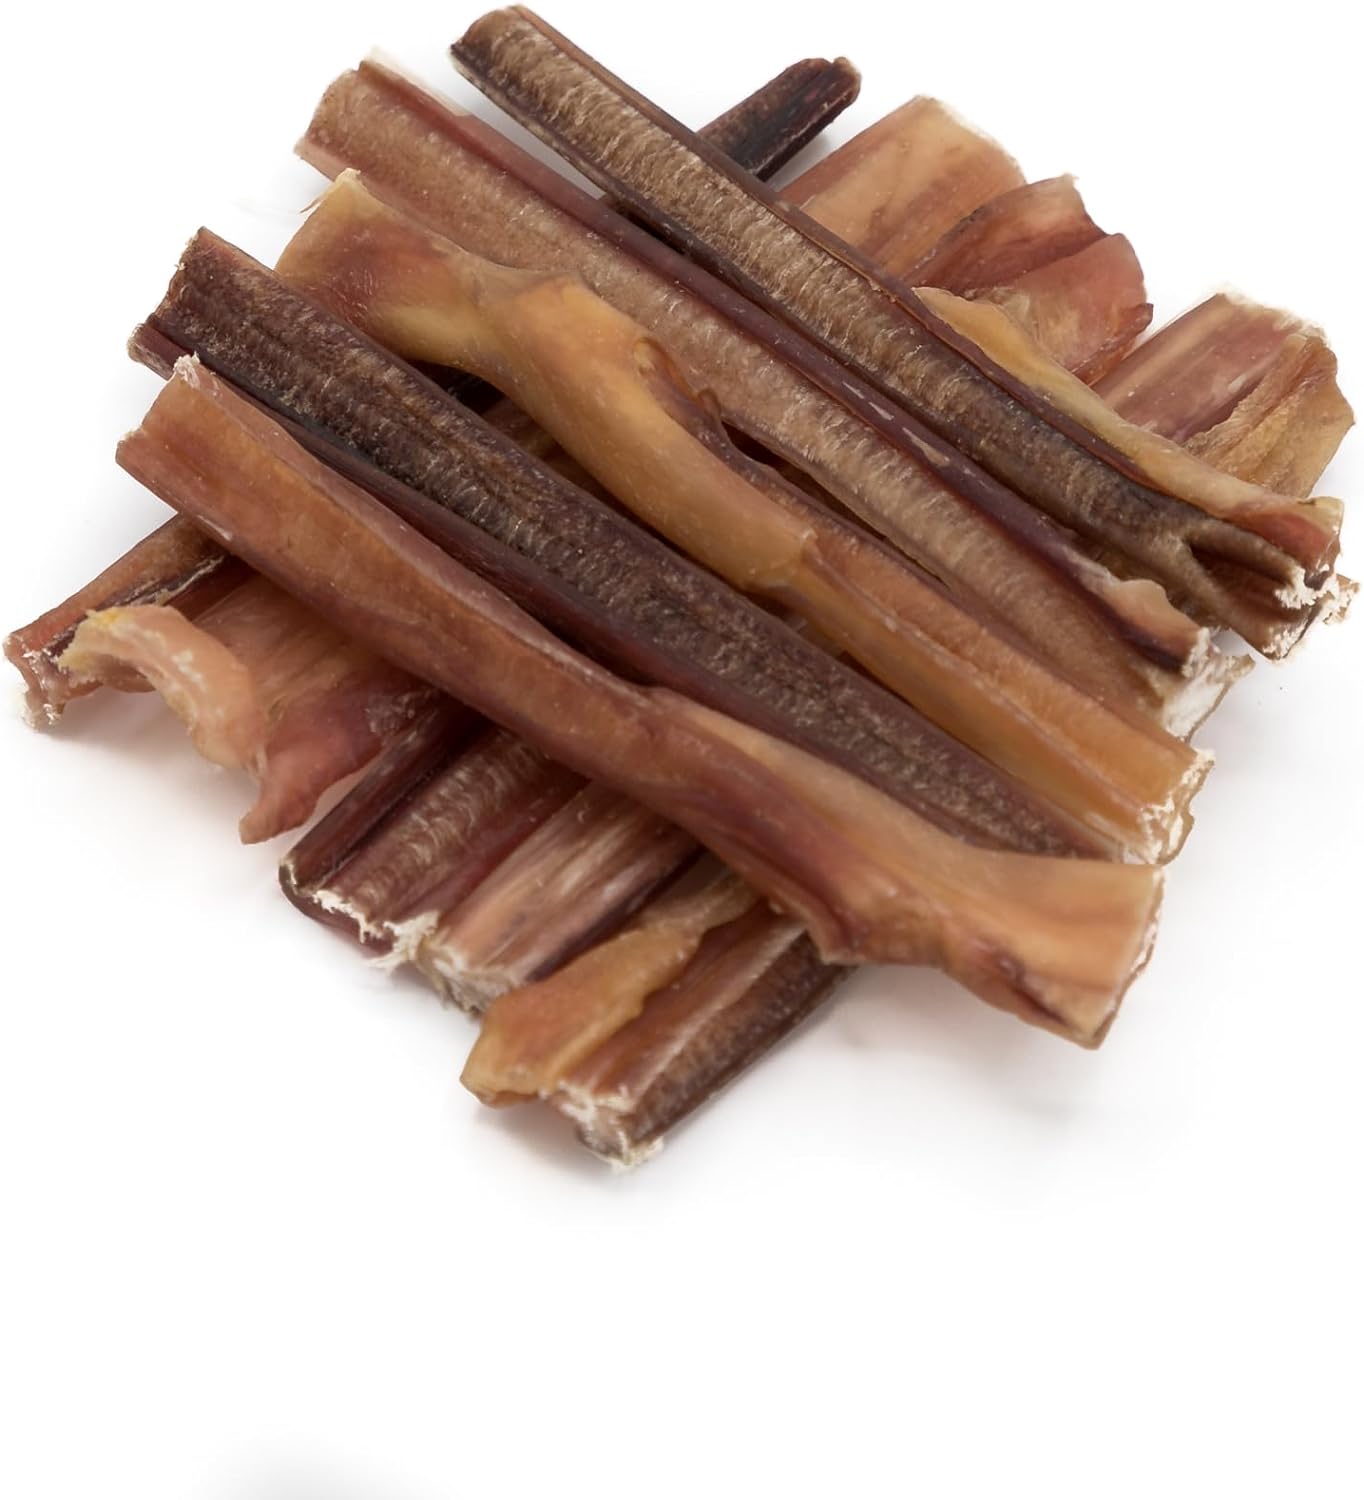 Best Bully Sticks 4 Inch Bully Sticks for Dogs - 100% Natural, Grass-Fed Beef, Dog Bully Sticks for Small Dogs and Puppies - Grain and Rawhide Free Bully Stick Dog Chews | 8 oz : Pet Supplies